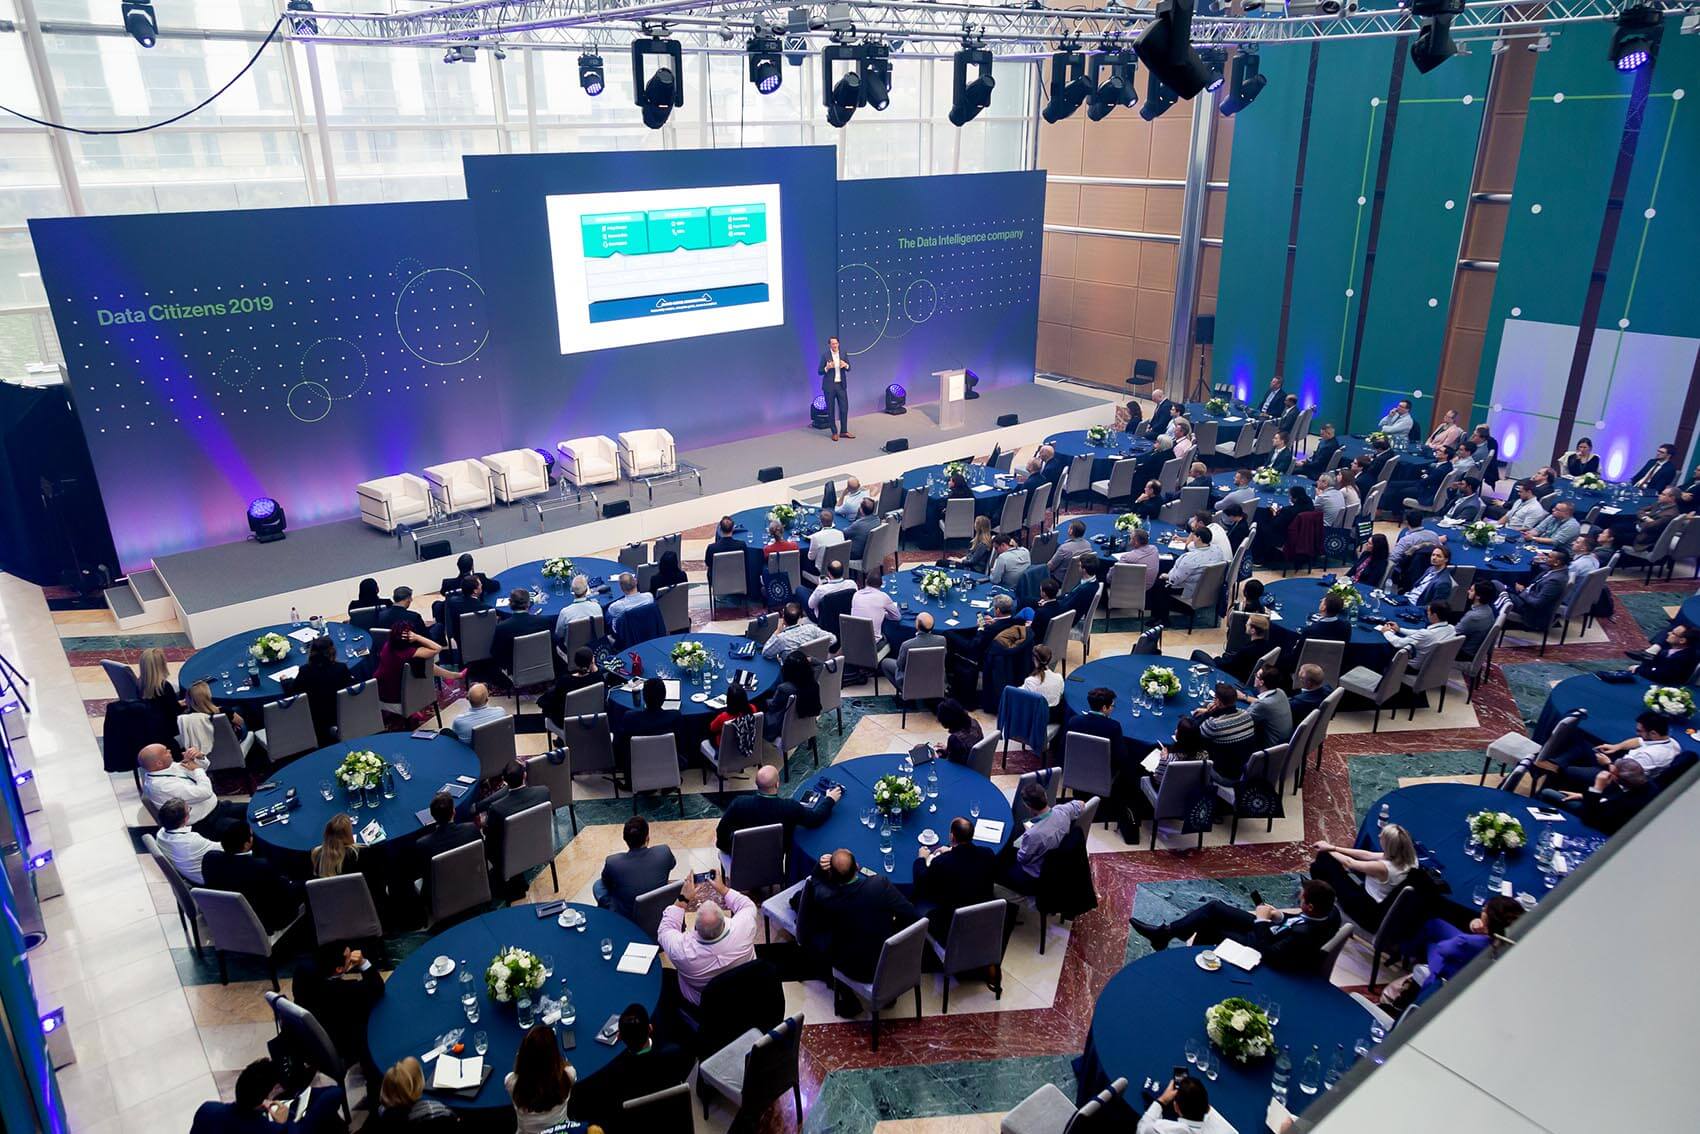 Event Management Companies - Corporate Conference EMEA - stage set